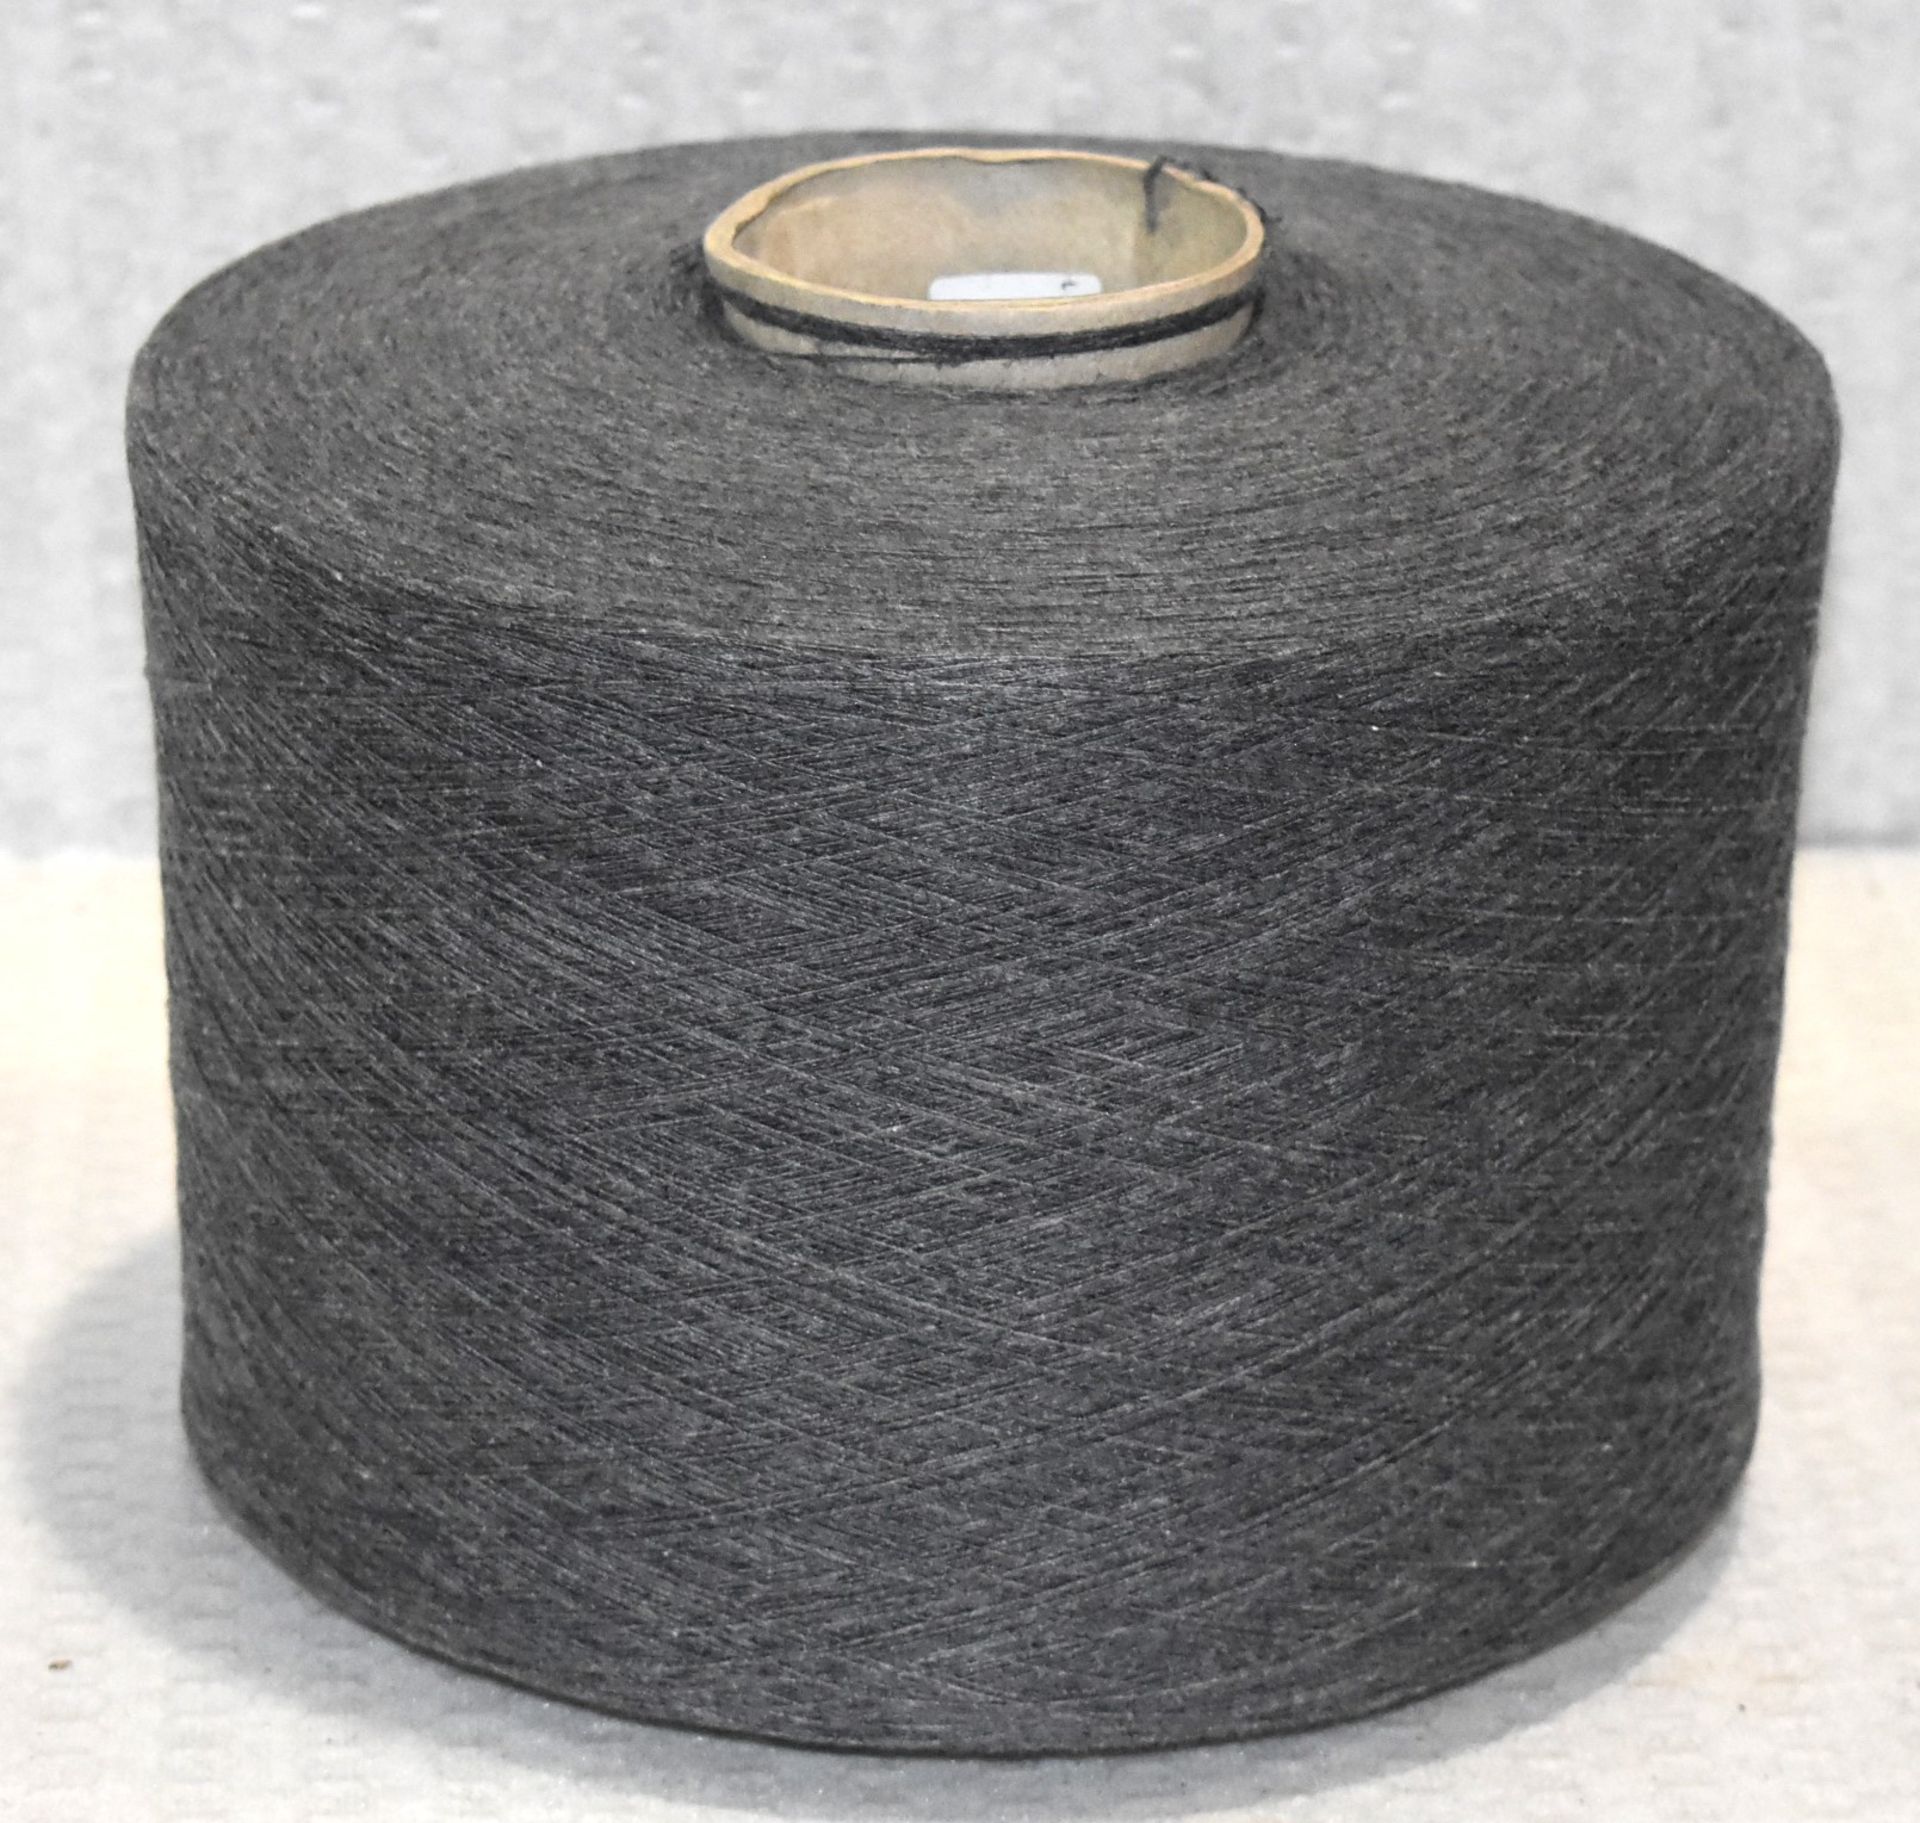 1 x Cone of 1/13 MicroCotton Knitting Yarn - Mid Grey - Approx Weight: 2,500g - New Stock ABL Yarn - Image 8 of 18